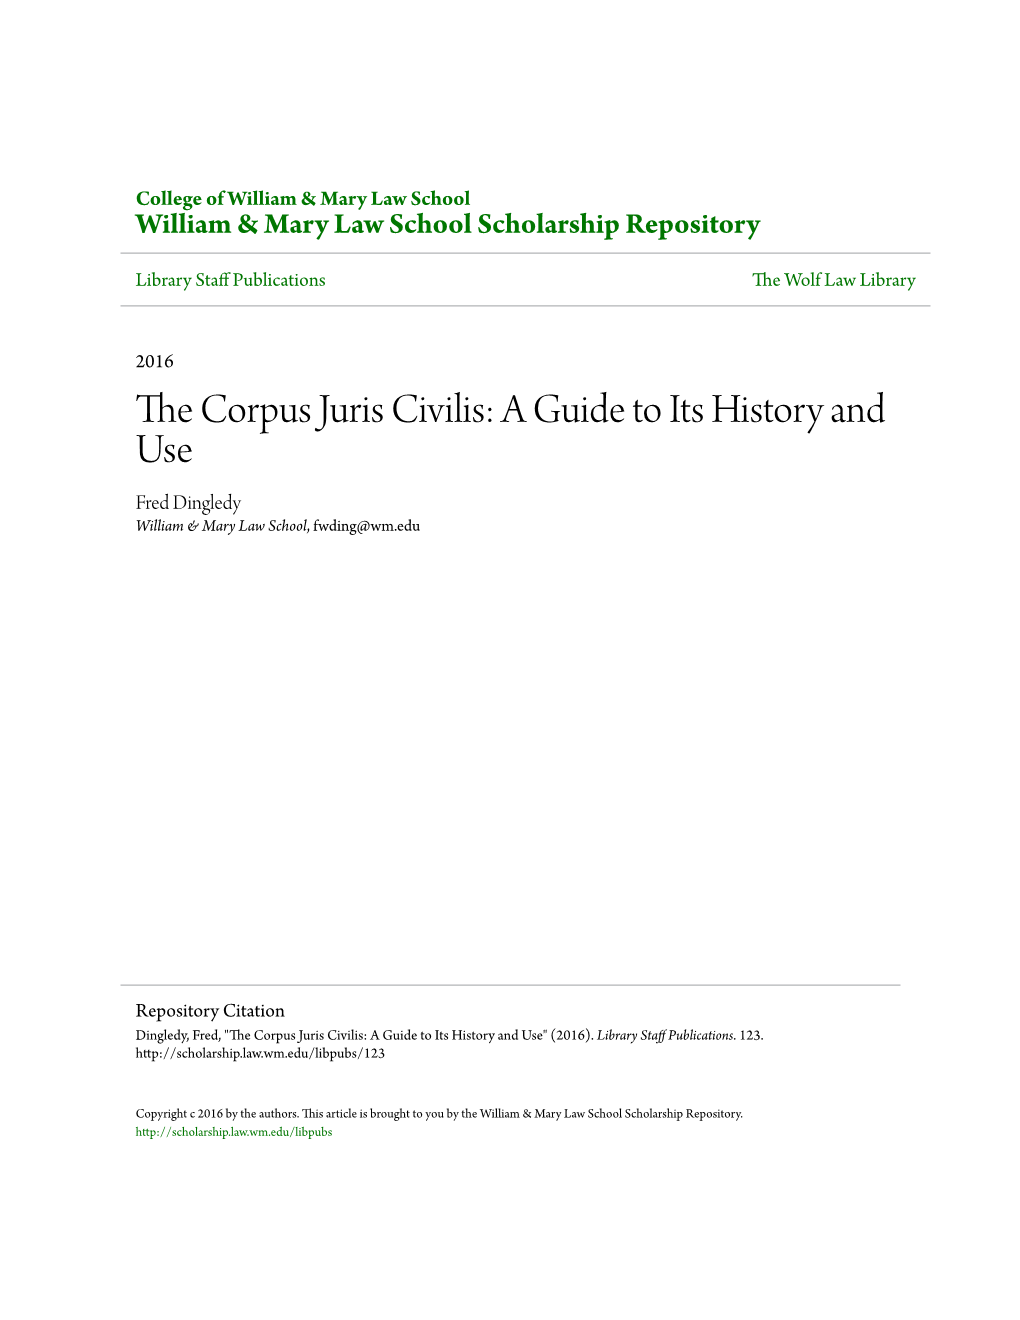 The Corpus Juris Civilis: a Guide to Its History and Use*